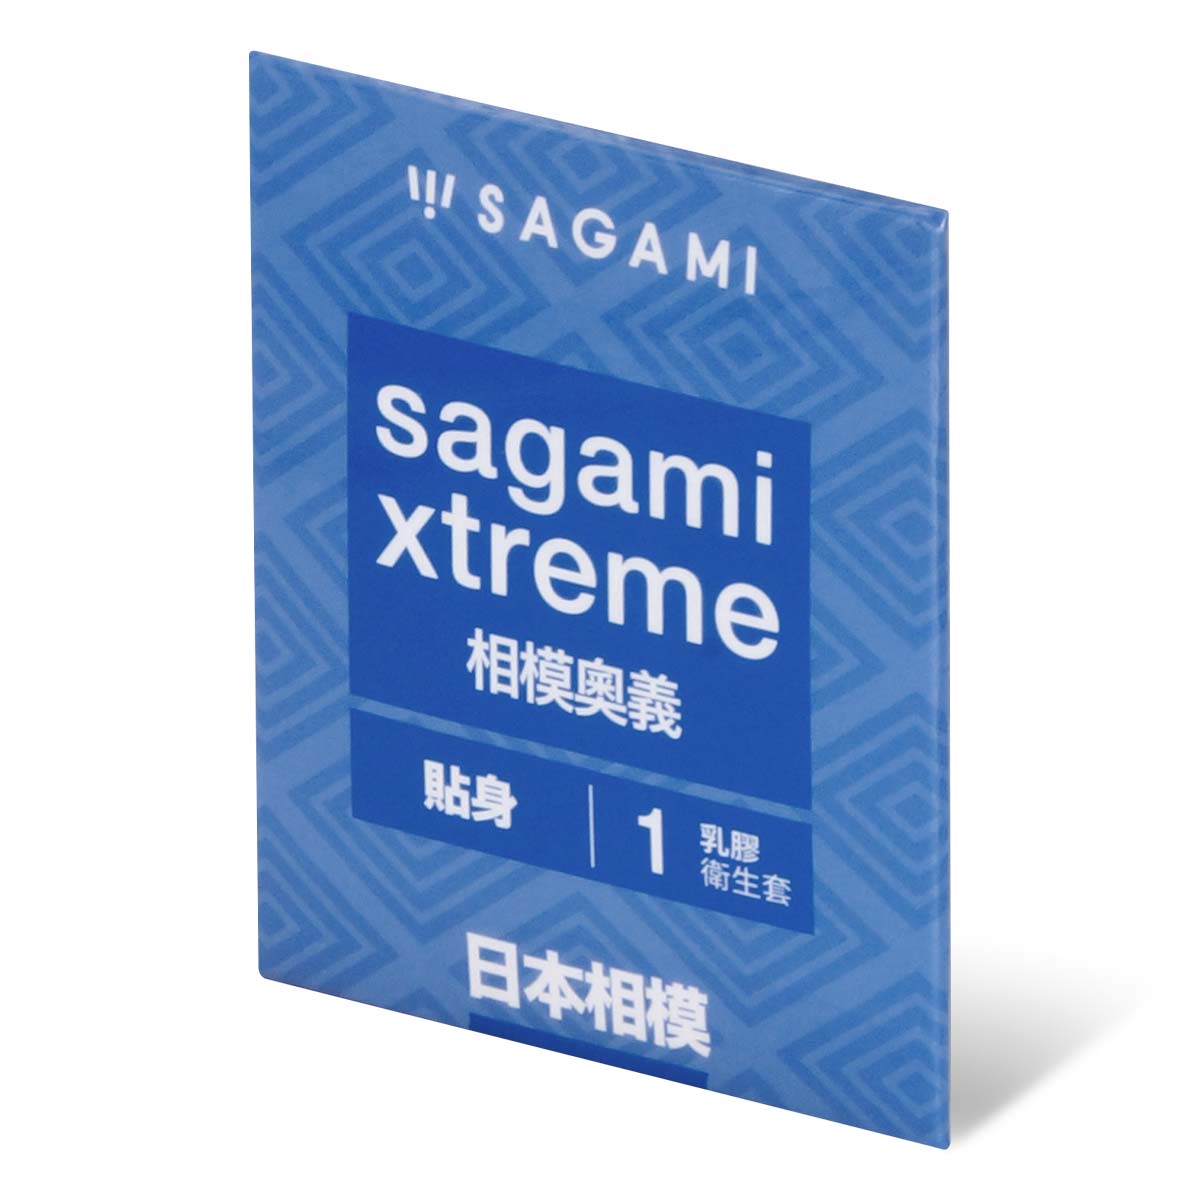 Sagami Xtreme Feel Fit (2nd generation) 51mm 1's Pack Latex Condom-p_1